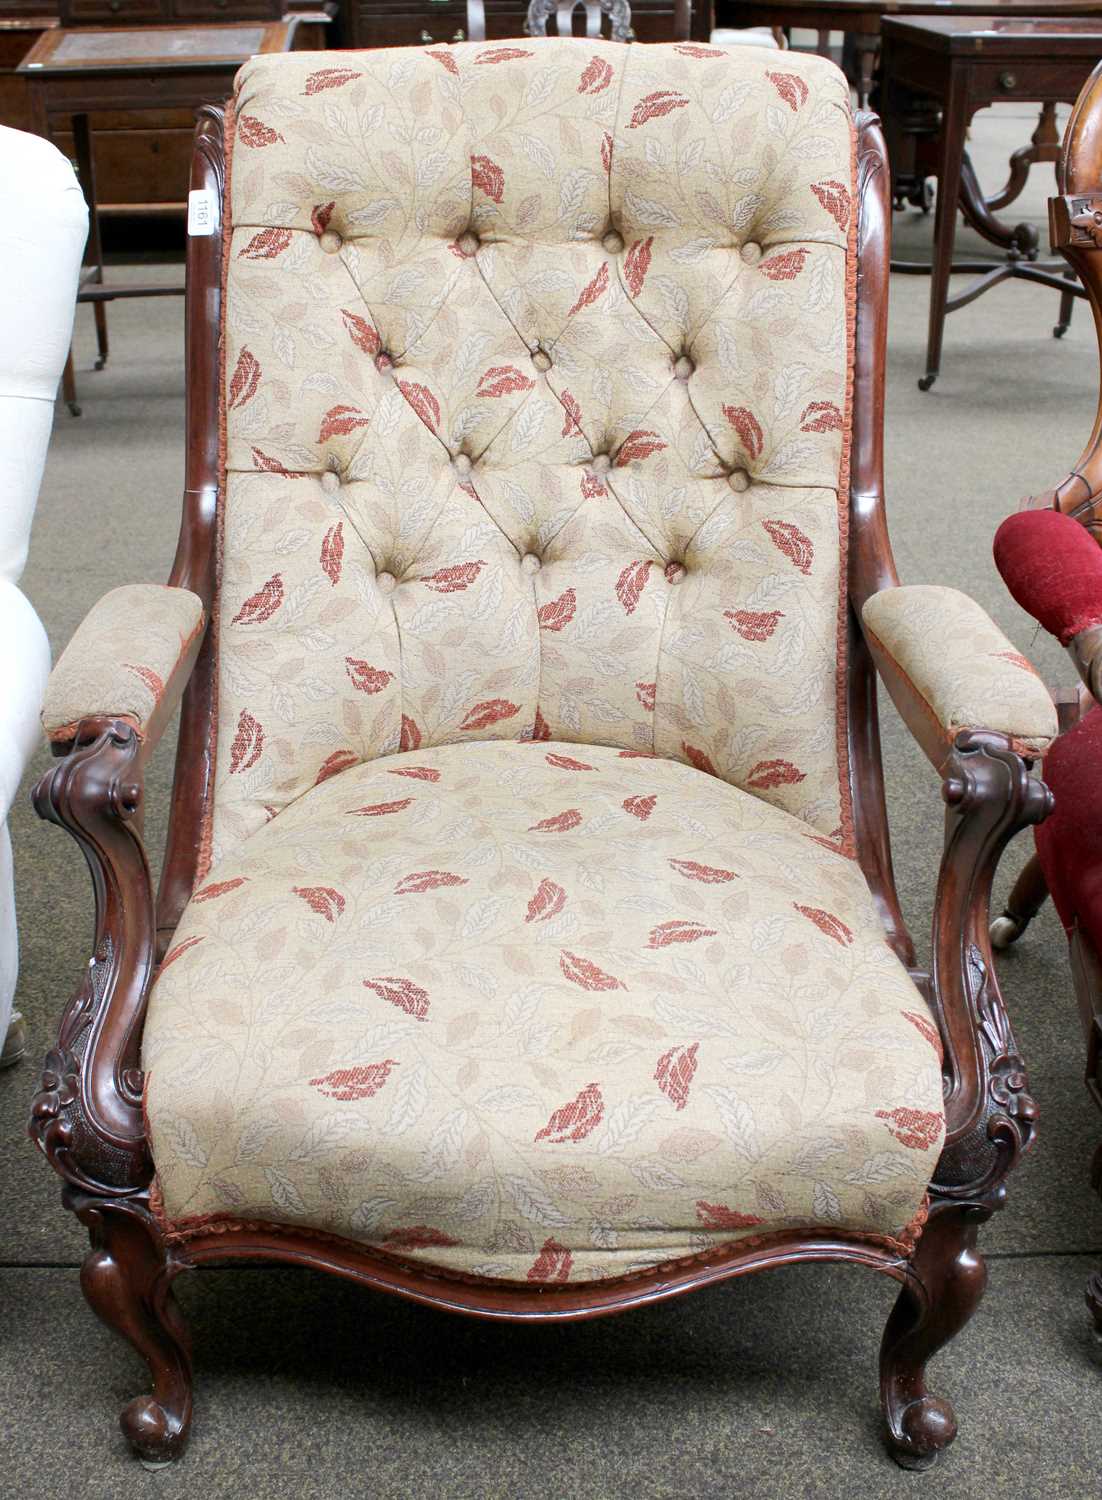 A Victorian Carved Mahogany Part Upholstered Chair, with buttoned back